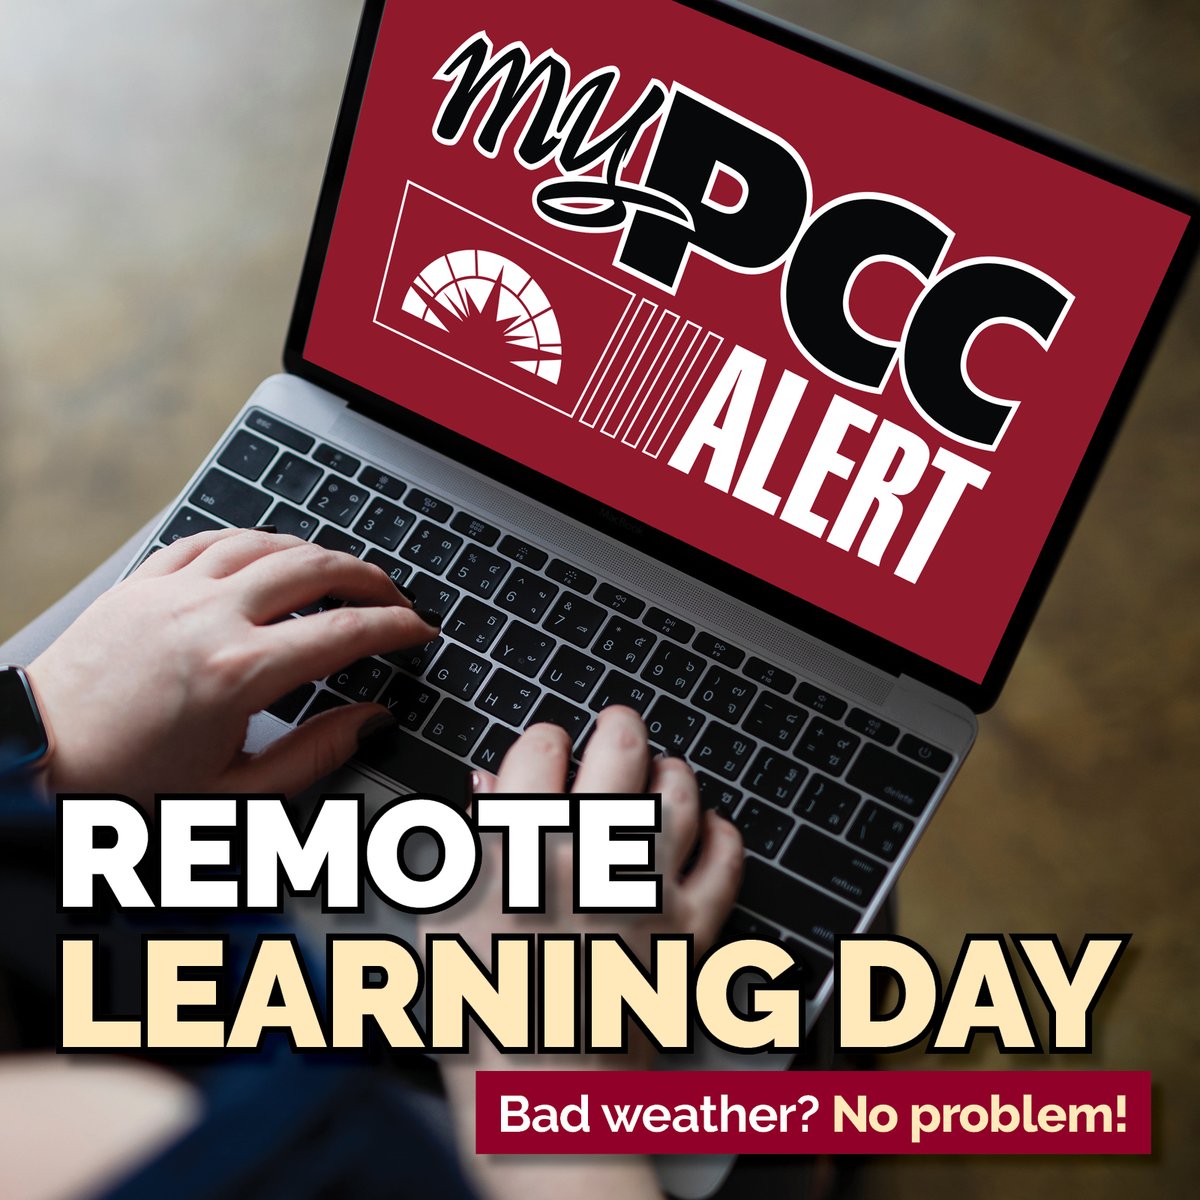 REMOTE STATUS - PUEBLO CAMPUS: Due to weather, the Pueblo campus will switch to remote status at 1 p.m. Thursday, March 14. Students, check MyCourses for specific class instructions. All nonessential employees will work remotely. Info: pueblocc.edu/weather. #MyPCCAlert